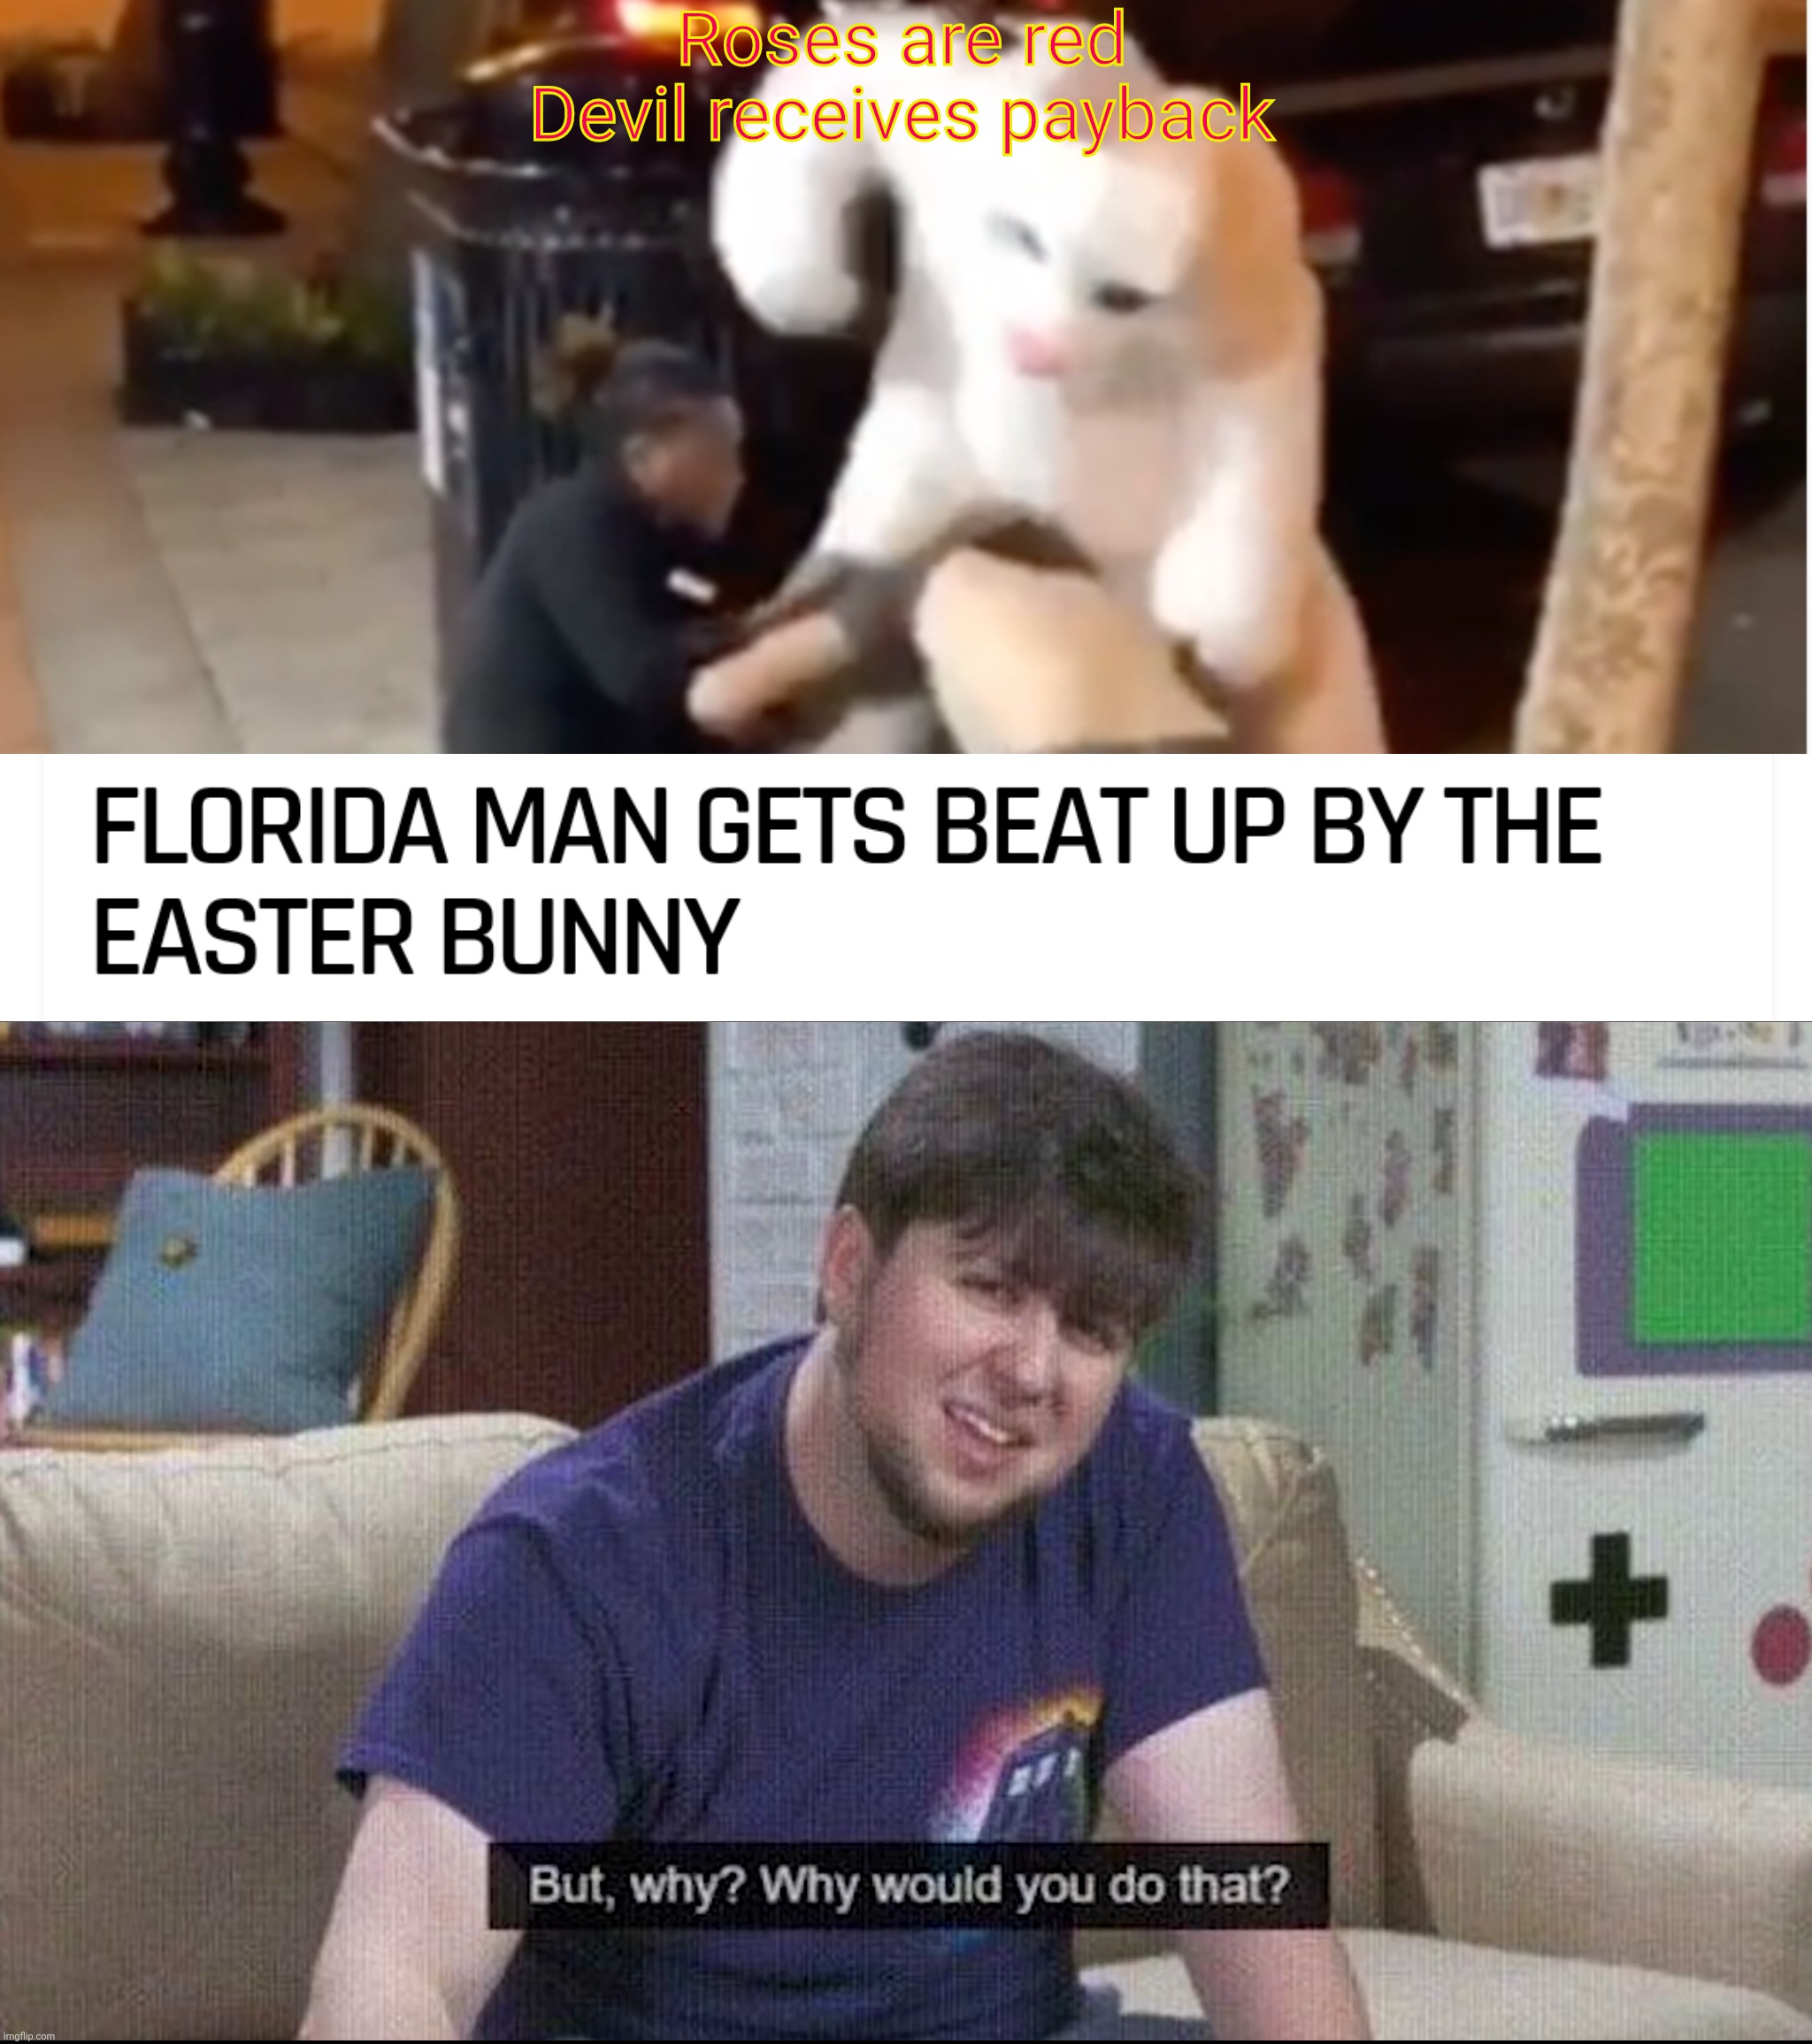 Florida Man receives a payback | Roses are red
Devil receives payback | image tagged in but why why would you do that,florida man,memes,funny,easter bunny,gifs | made w/ Imgflip meme maker